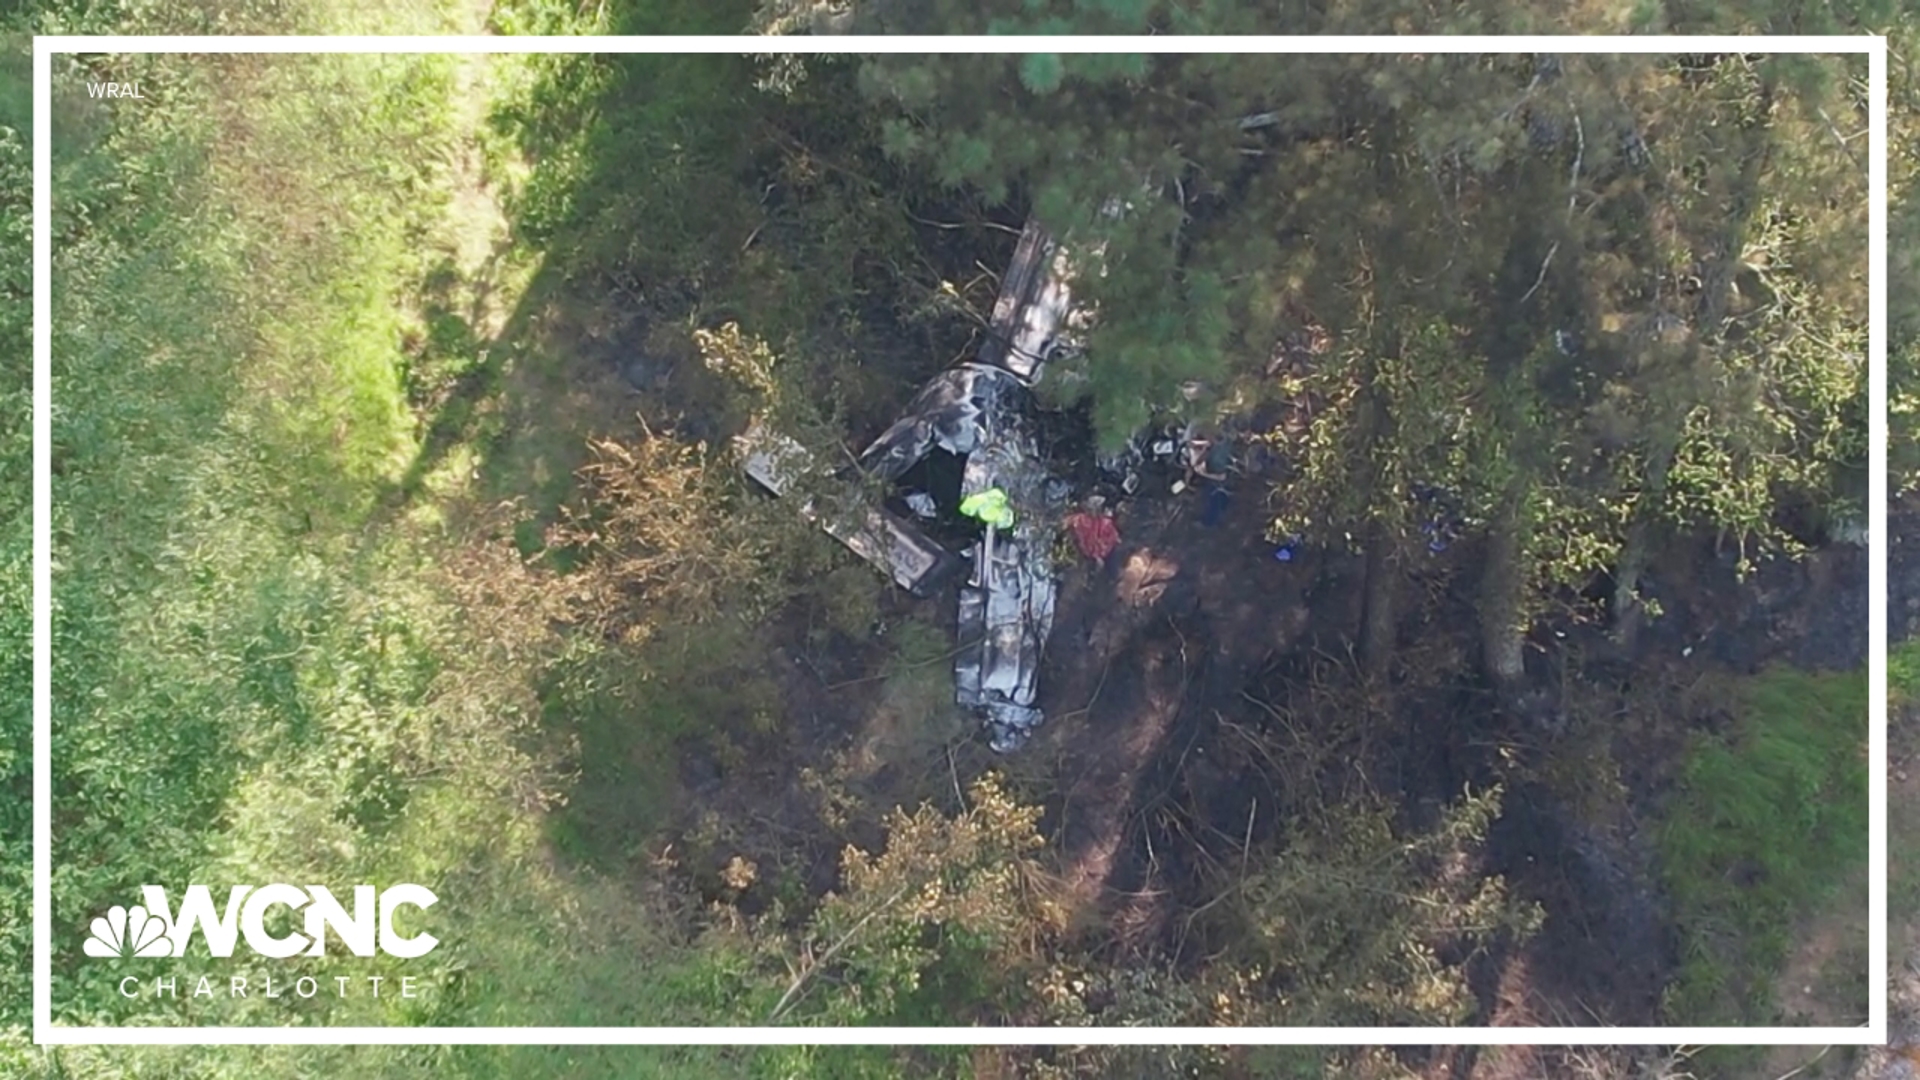 Two people were killed Friday when a small plane crashed near the Siler City Municipal Airport, according to the State Highway Patrol.